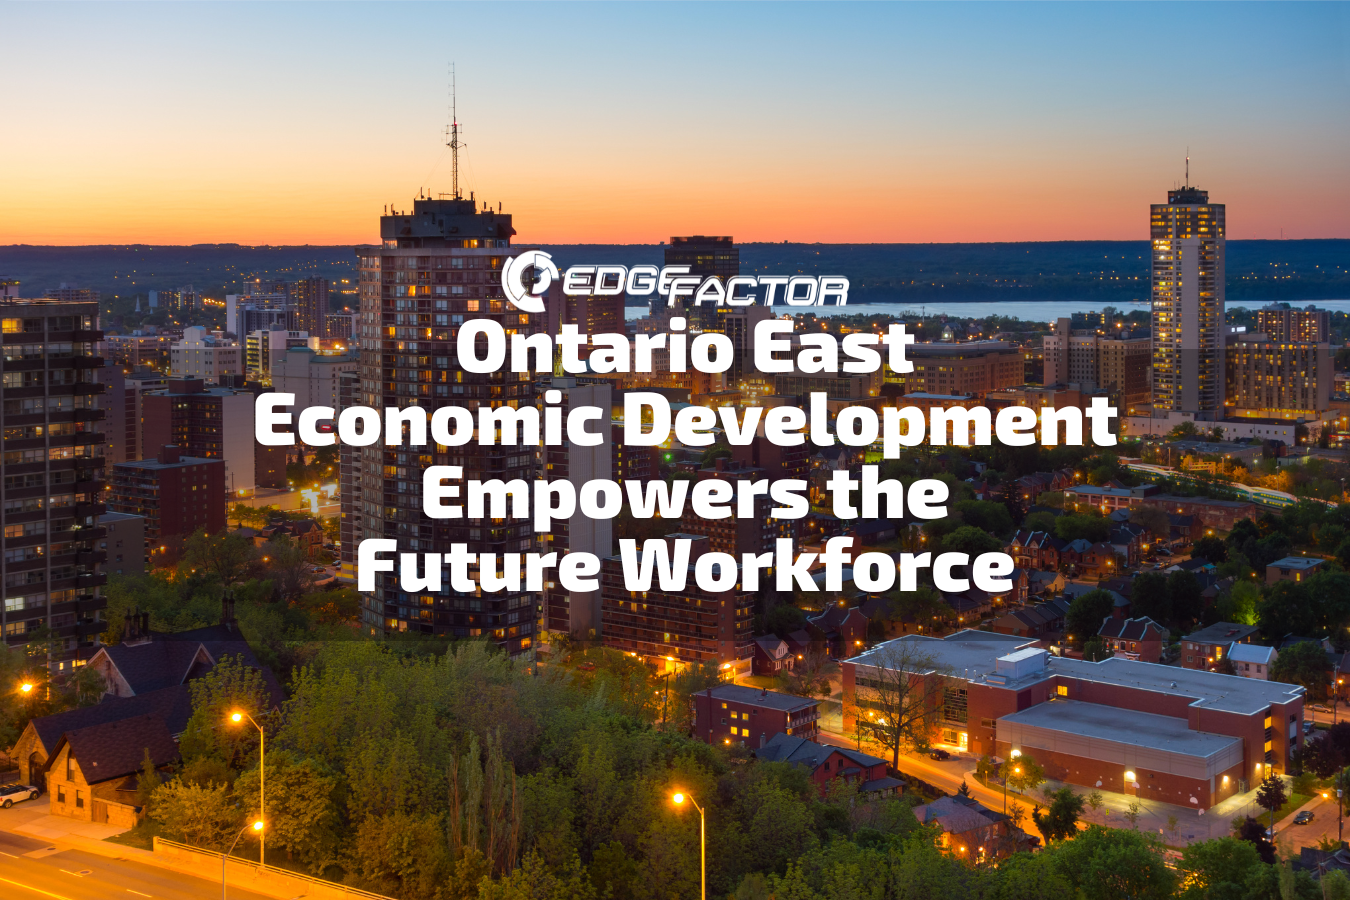 Ontario East Economic Development partners with Edge Factor to Empower the Future Workforce